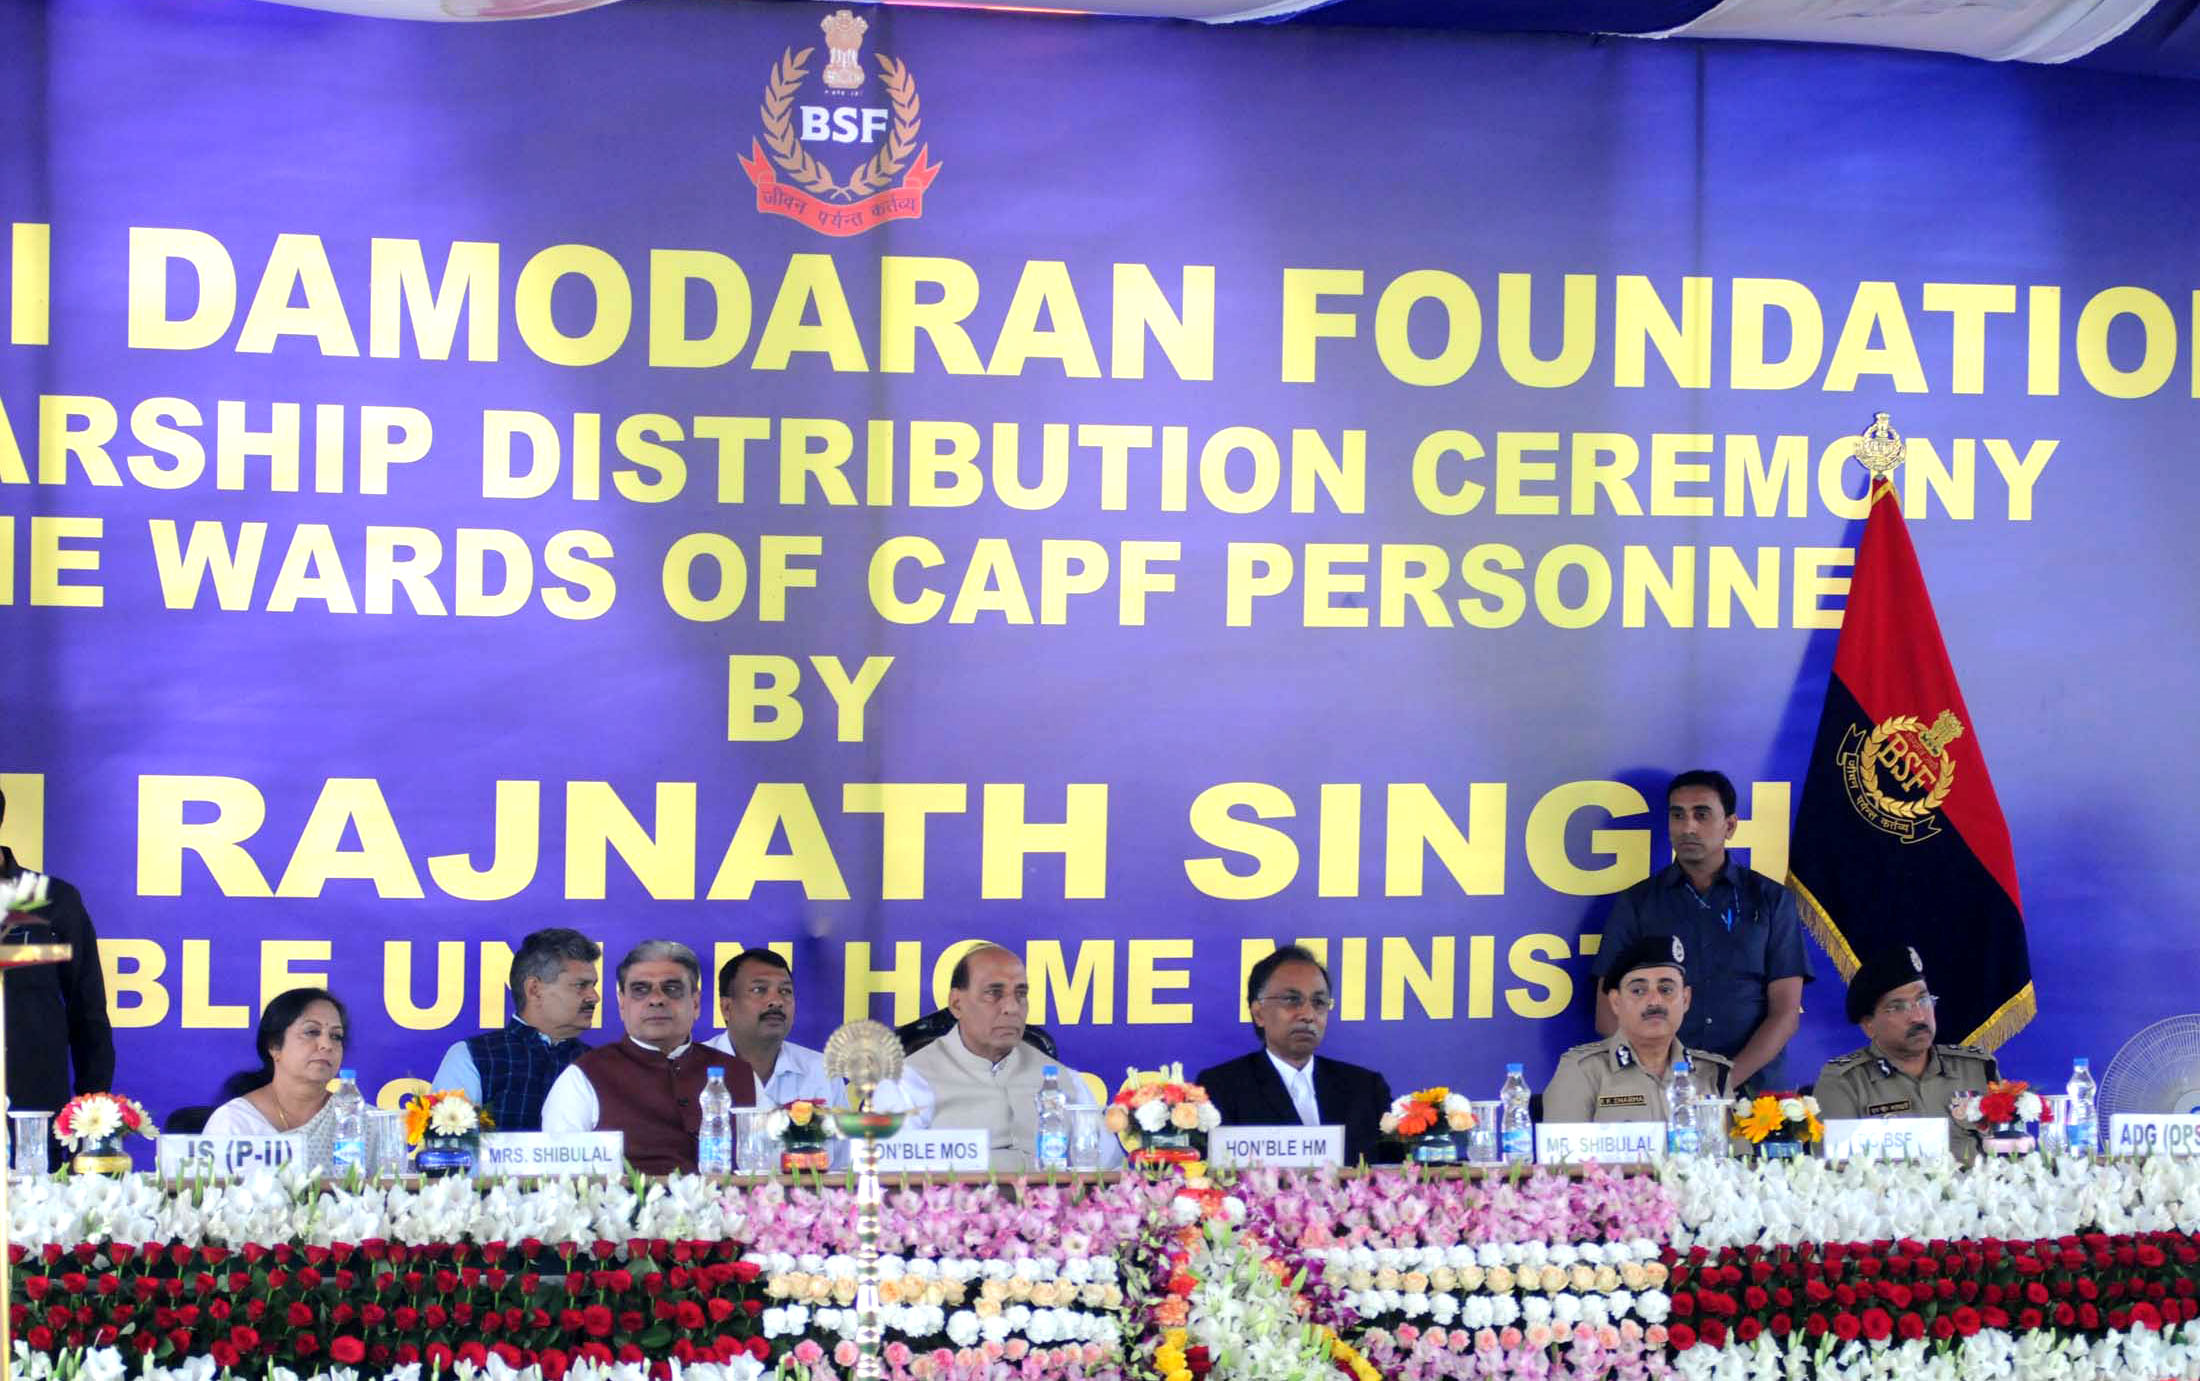 The Union Home Minister, Shri Rajnath Singh at Sarojini Damodaran Foundation Scholarship Distribution Ceremony, in New Delhi on March 18, 2016. 	The Minister of State for Home Affairs, Shri Haribhai Parthibhai Chaudhary and other dignitaries are also seen.